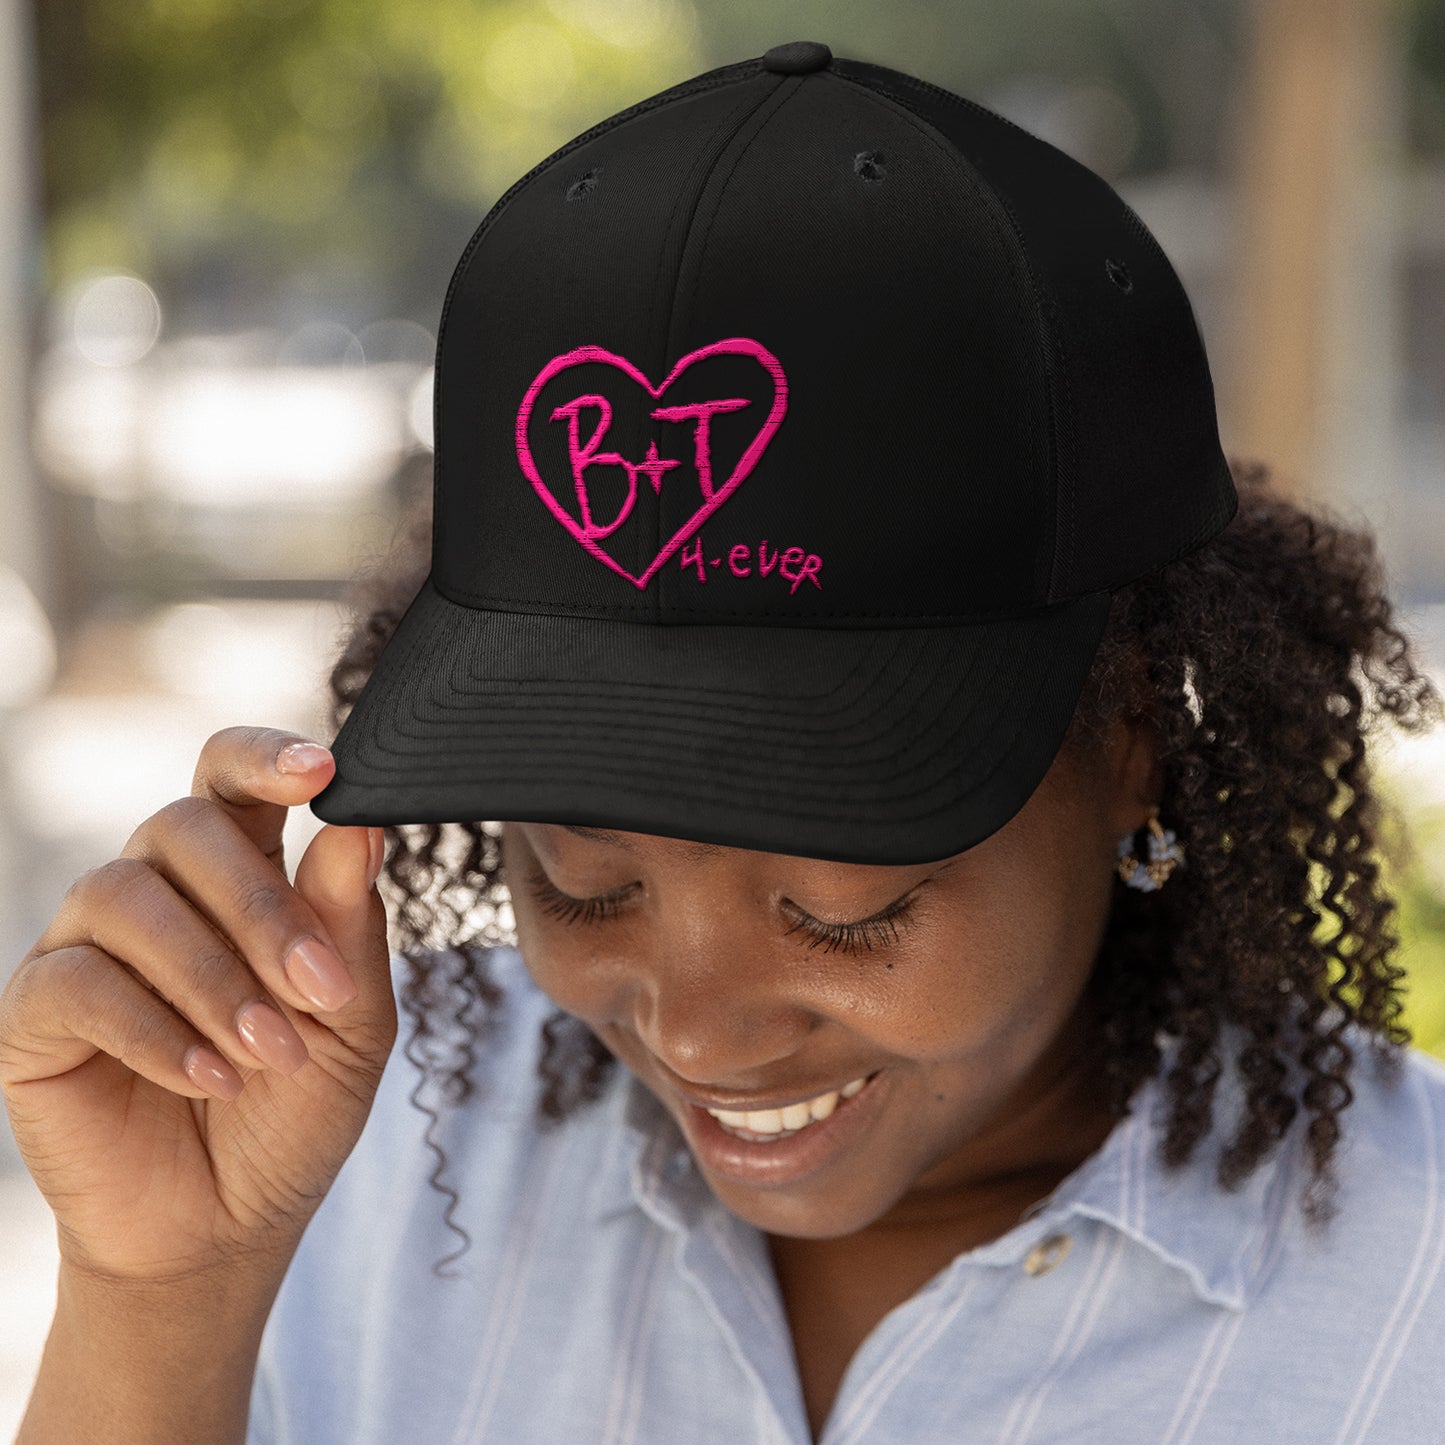 Load image into Gallery viewer, A female model wearing a black baseball hat. On the front of the hat is a pink heart with B &amp;amp; J inside it. Next to the heart is pink text saying 4 ever. Behind the model is a blurred park area.
